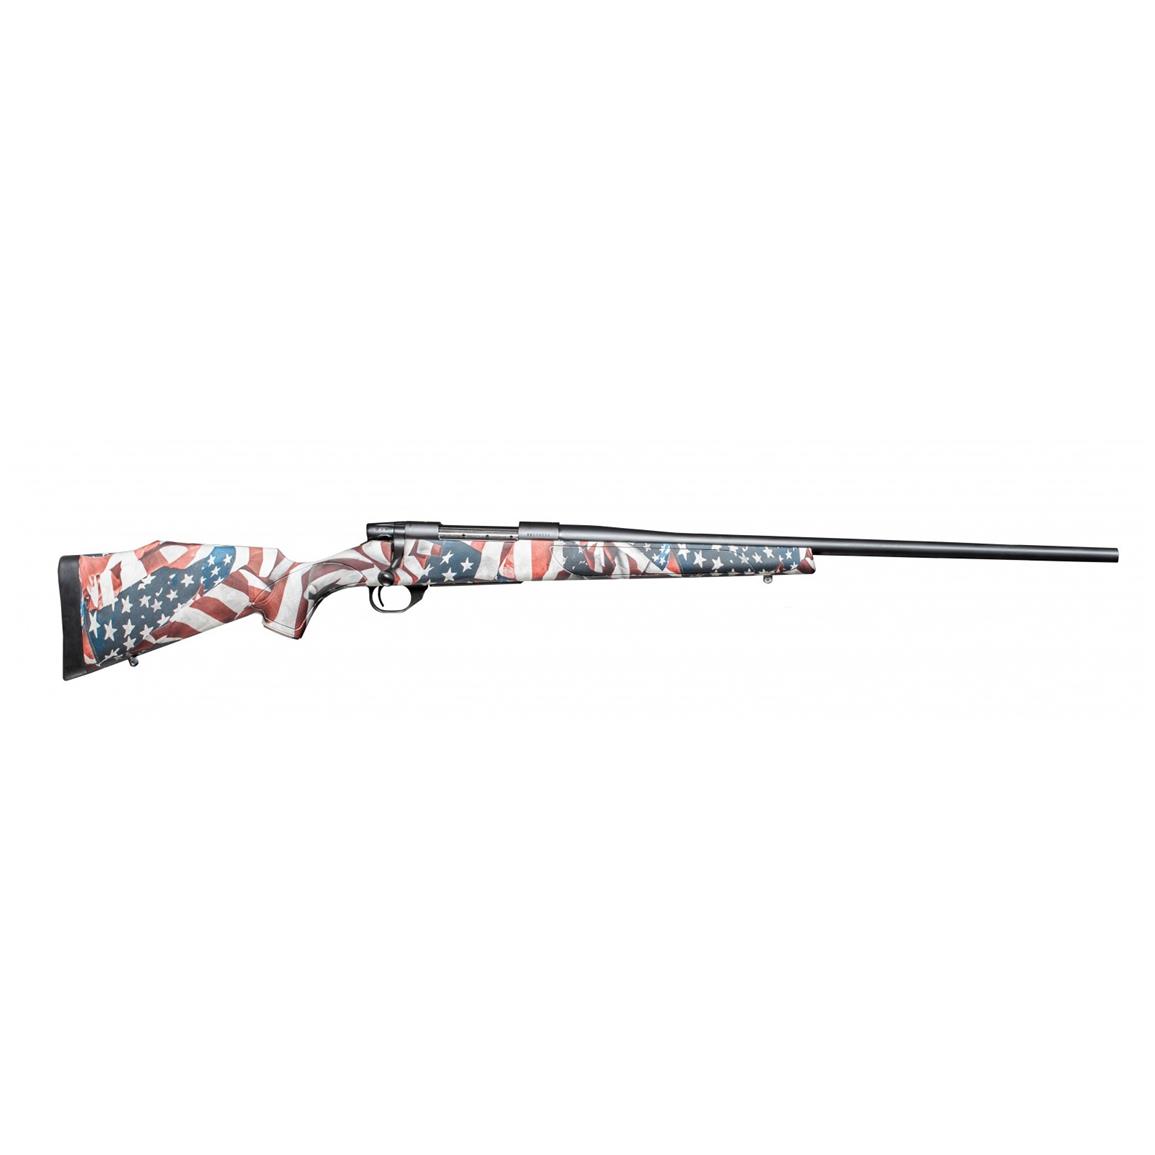 Weatherby WBY-X Vanguard 2 Saratoga, Bolt Action, .30-06 Springfield, 24" Barrel, 5+1 Rounds